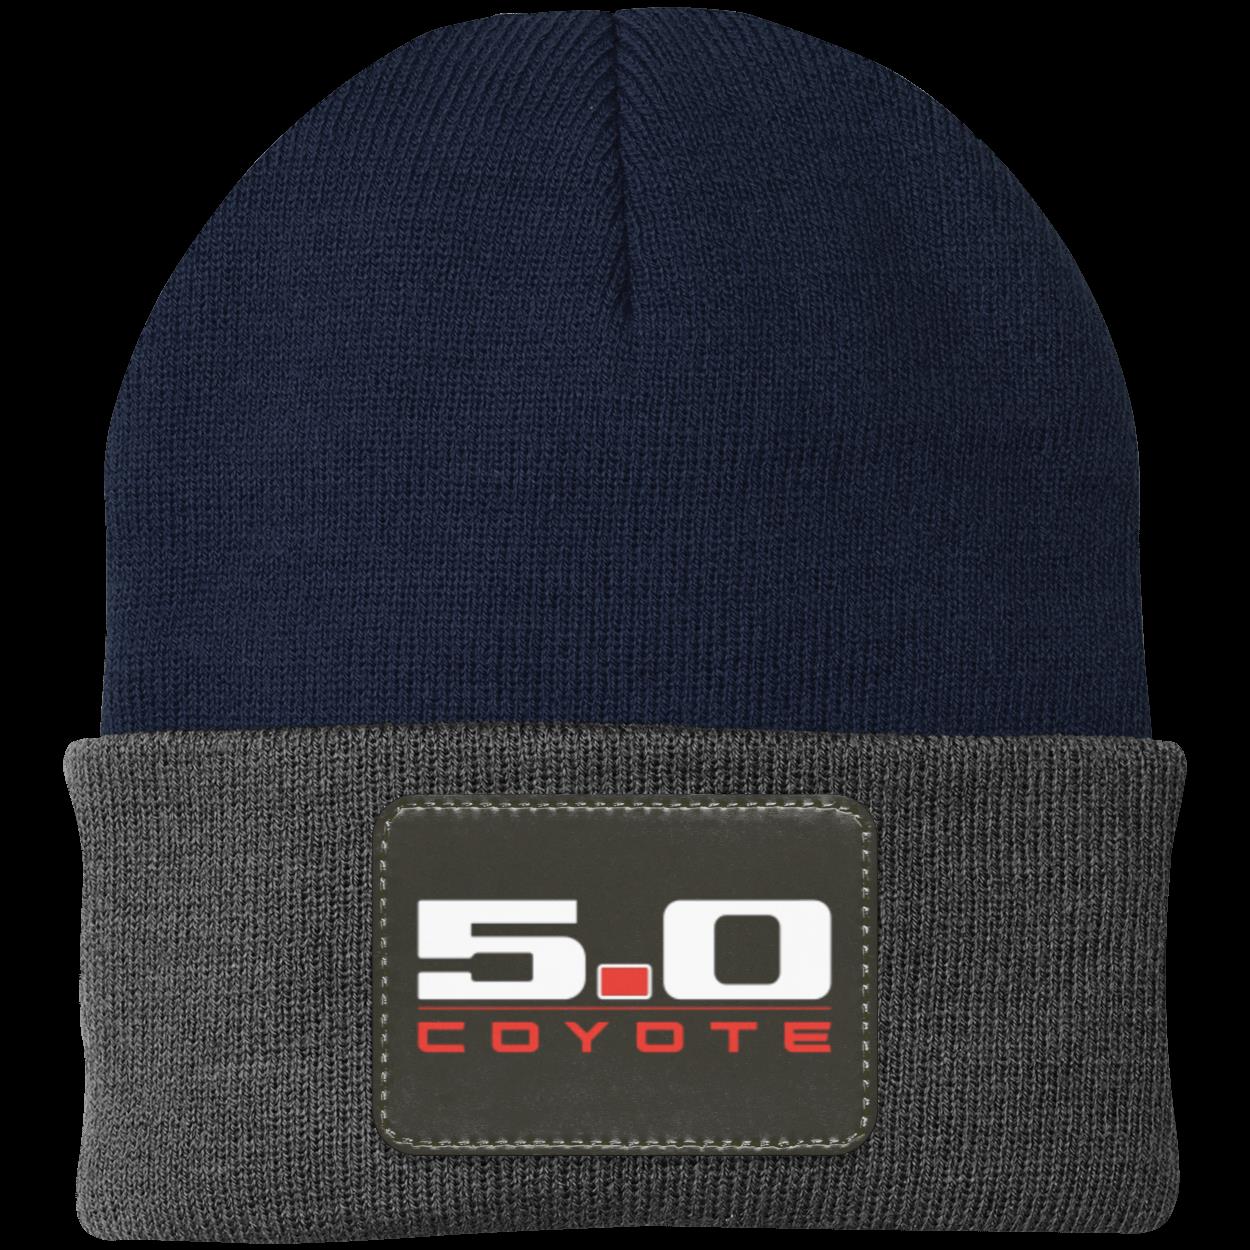 Coyote 5.0 S550 S197 Stang Knit Cap - Patch